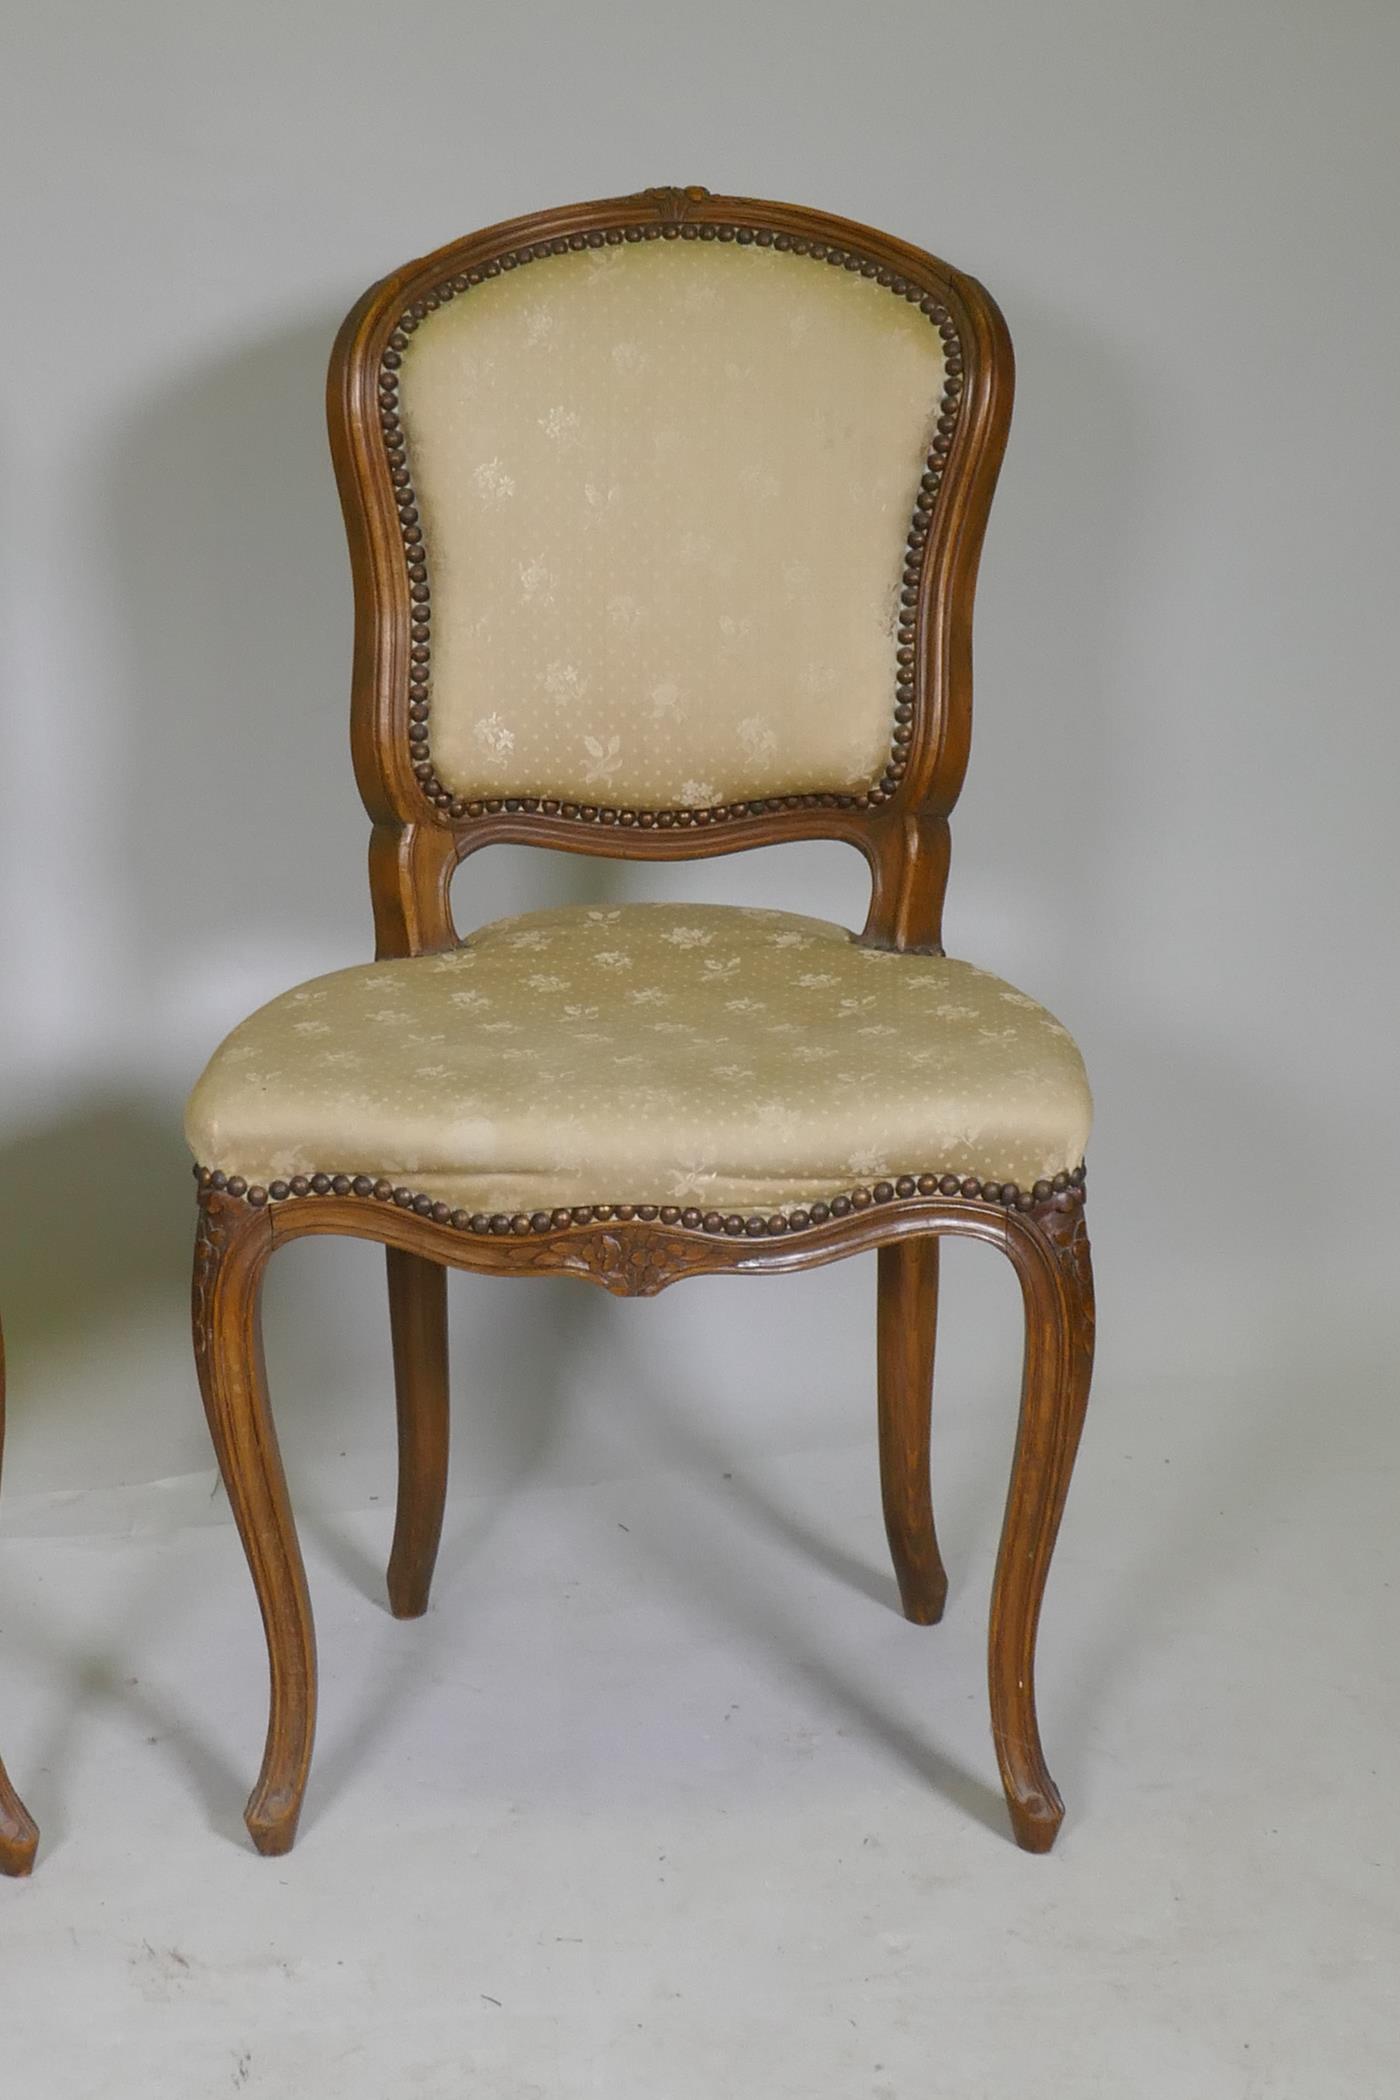 A pair of C19th French beechwood side chairs with carved decoration and brass stud detail - Image 2 of 3